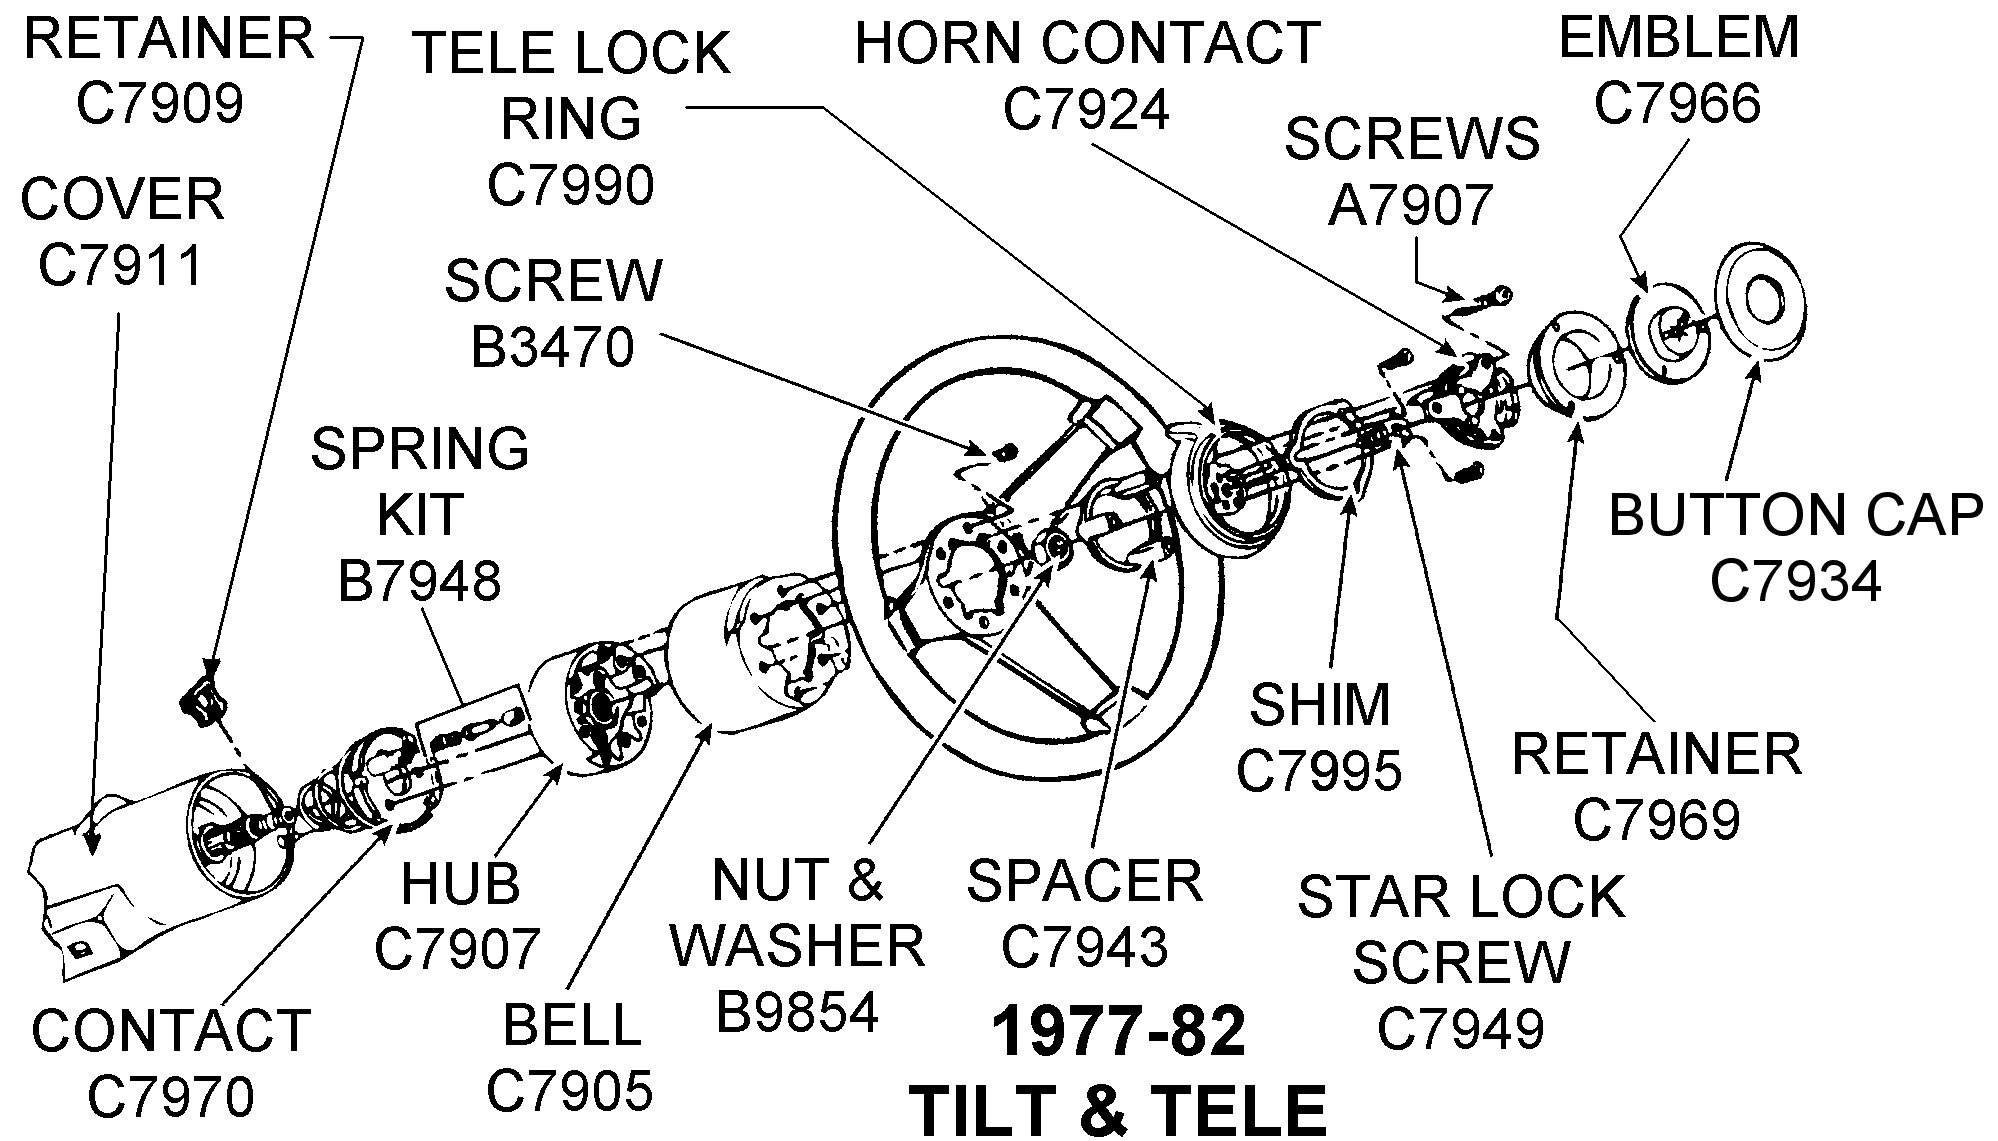 Wiring A 1985 Chevy Stering Coloumn Diagram] 2002 Saturn Wiring Diagrams Full Version Hd Quality Of Wiring A 1985 Chevy Stering Coloumn